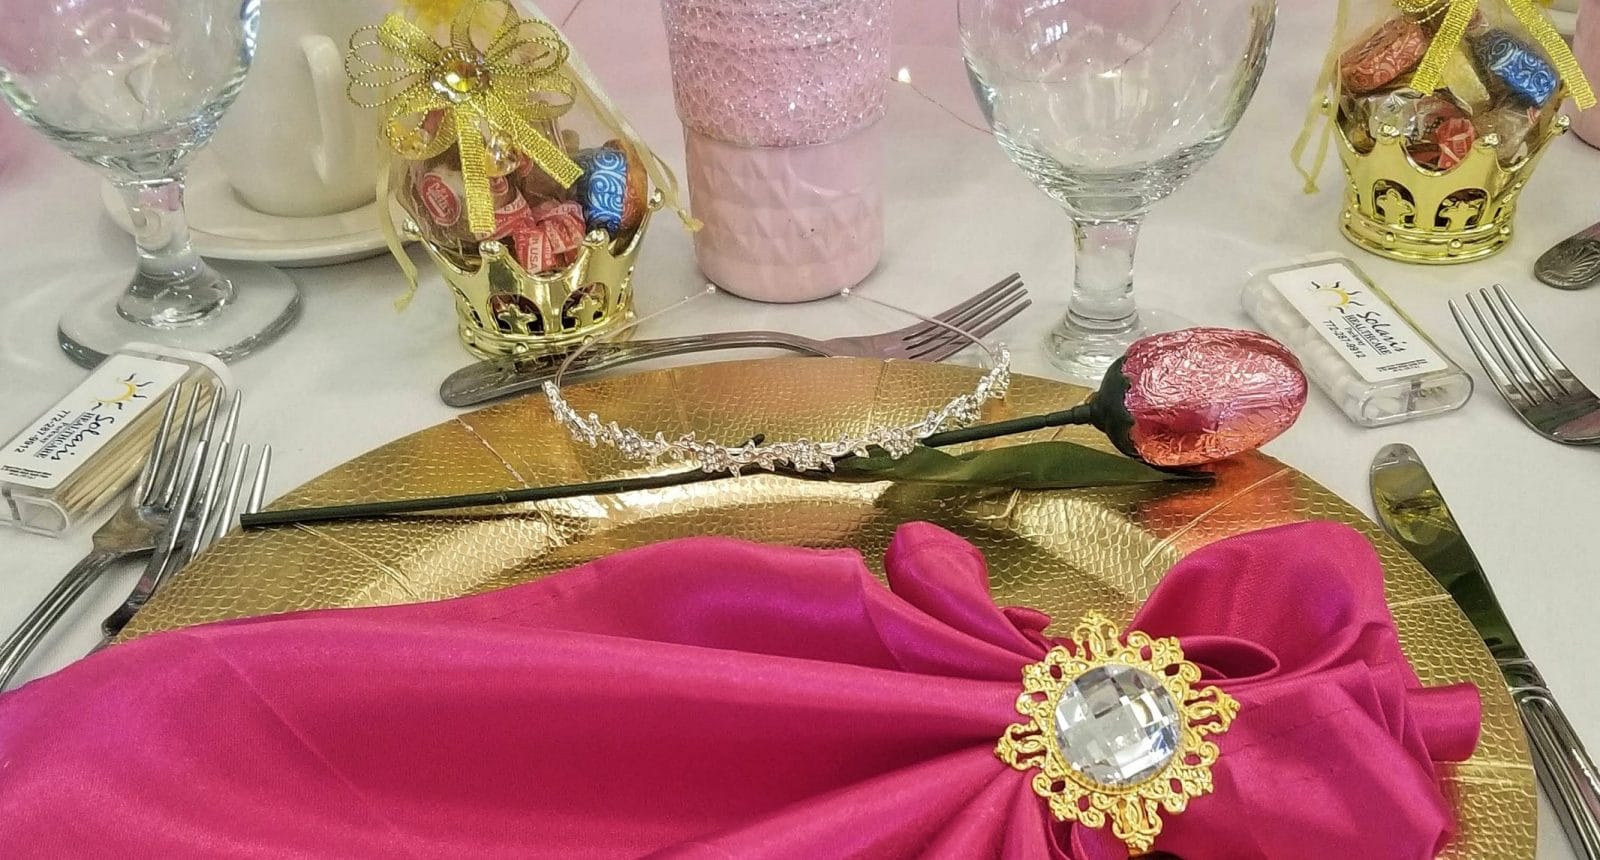 Table setting with pink napkin over gold plate